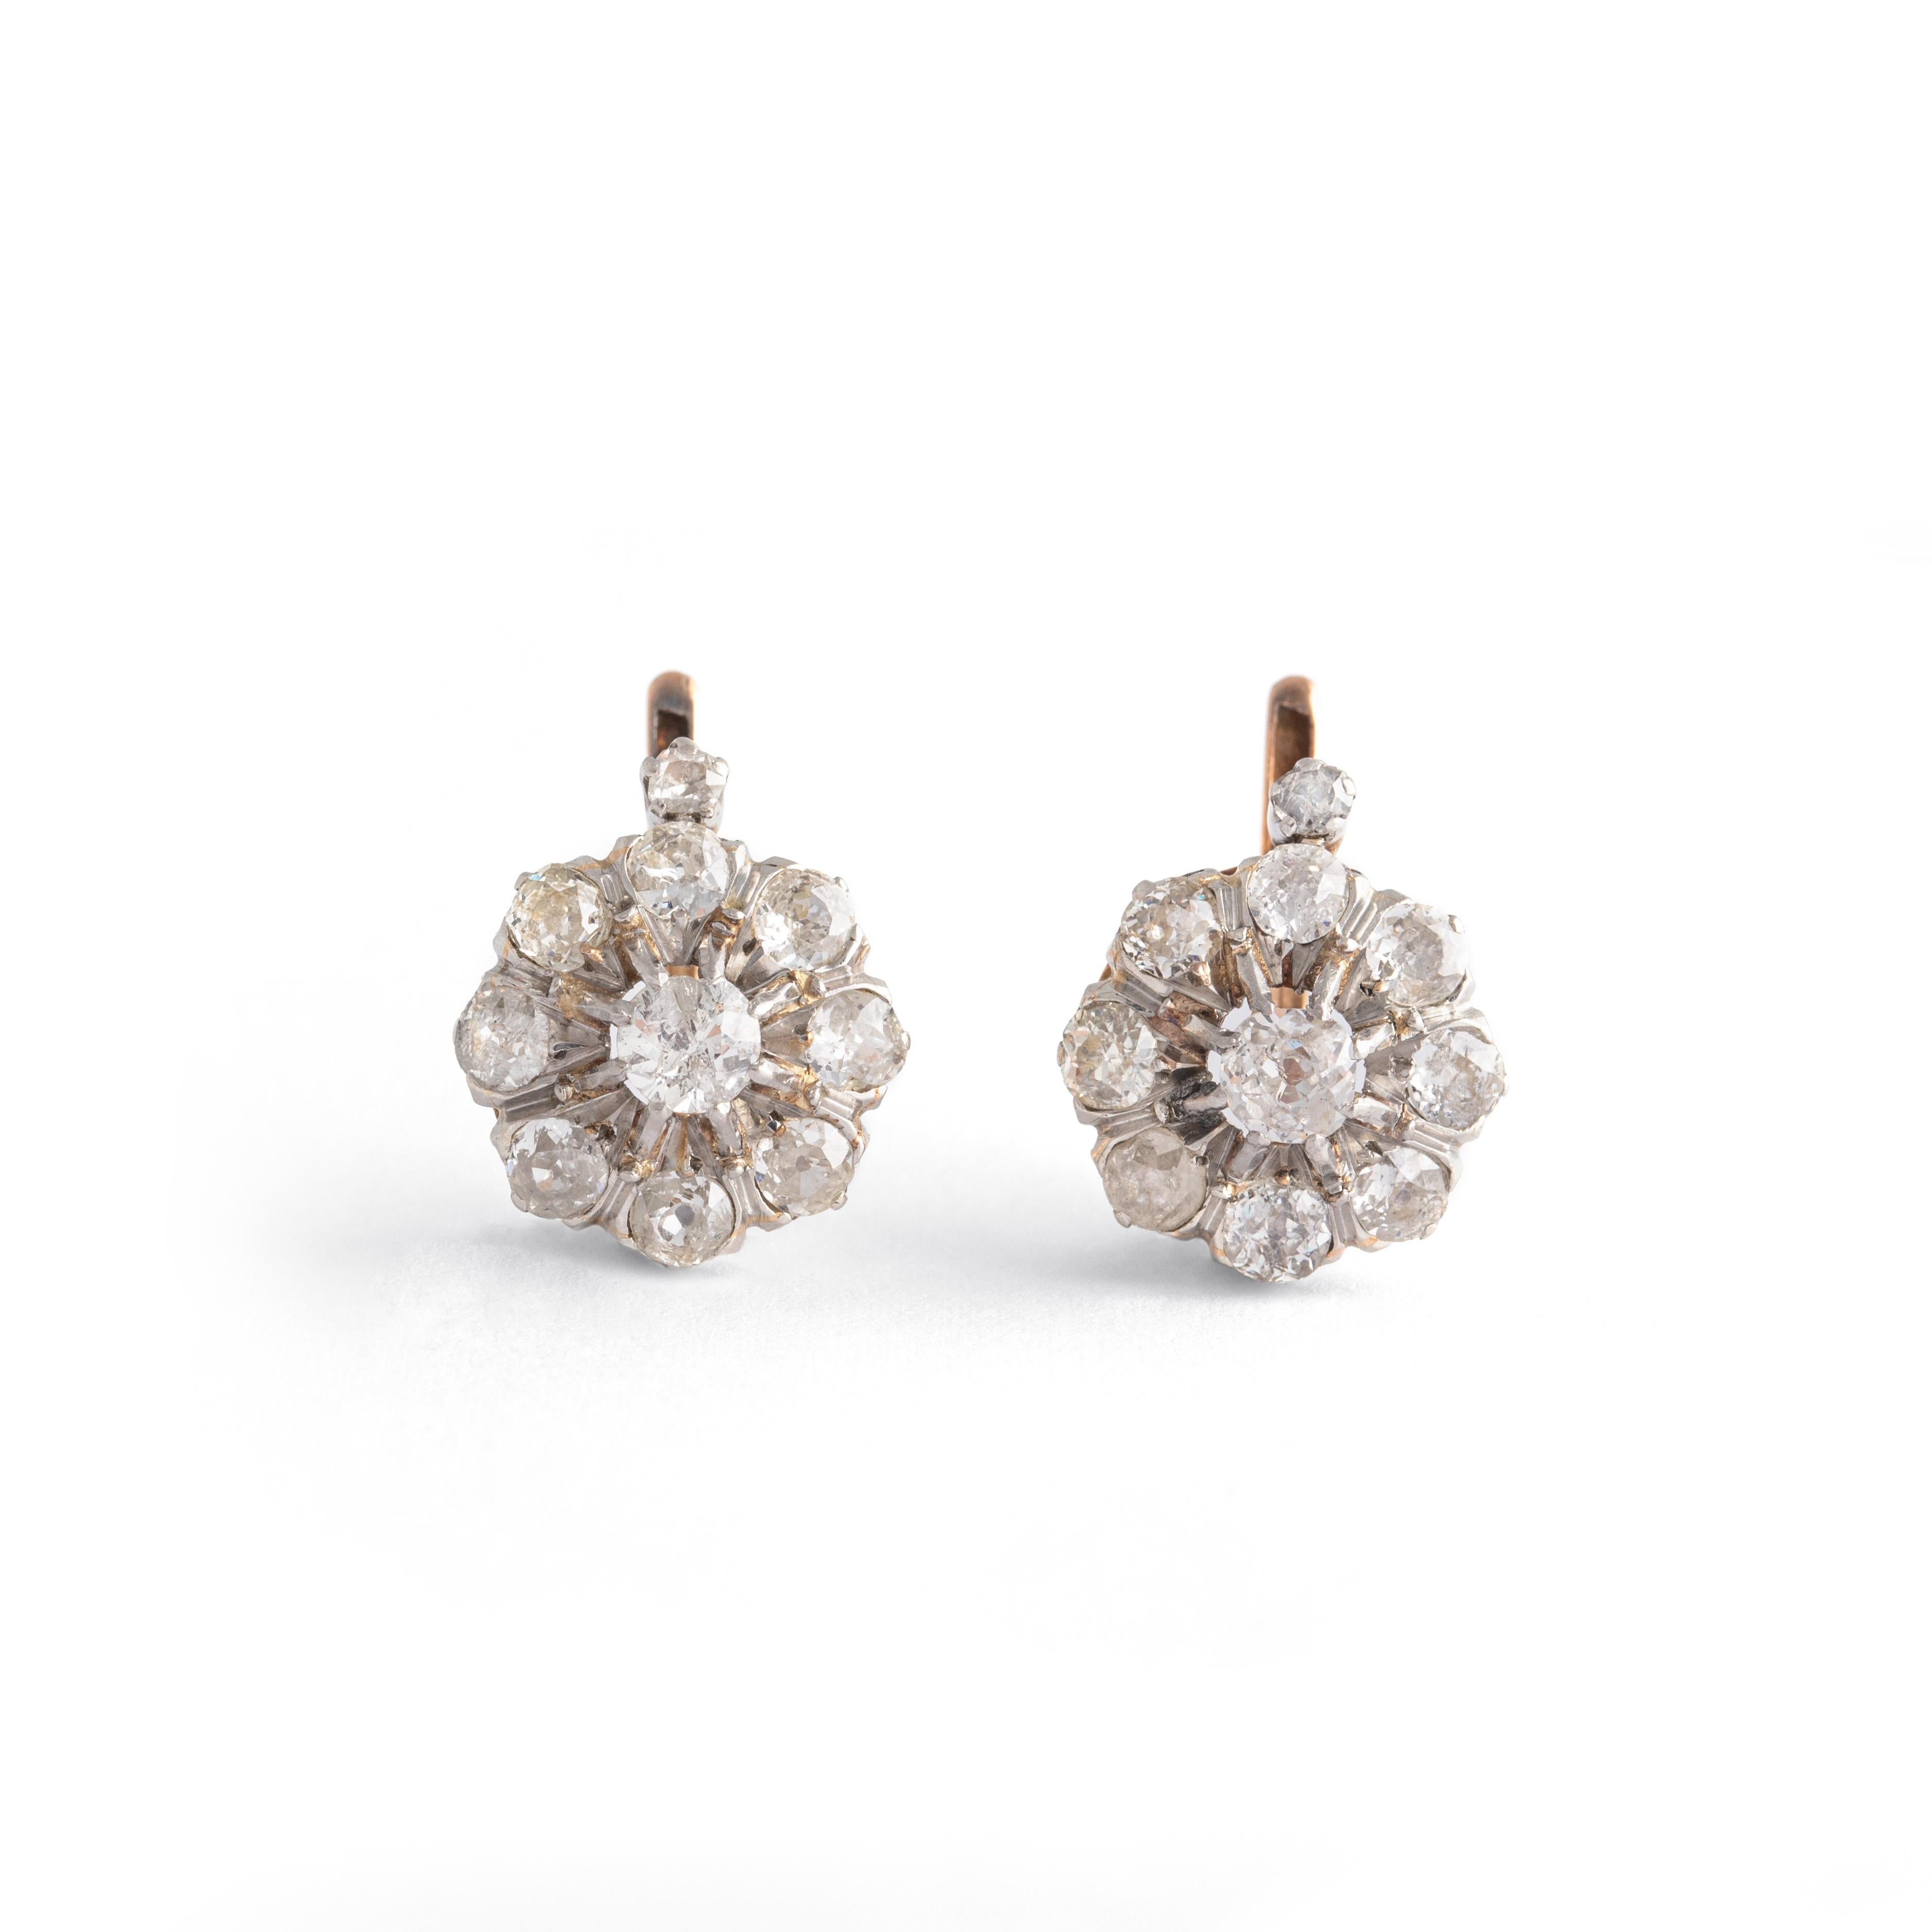 Antique Diamond Dormeuses Earrings.
Old mine cut diamond on gold.
Early 20th Century.

Dimensions: approx. 1.70 x 1.40 centimeters.
Total gross weight: 7.09 grams.
